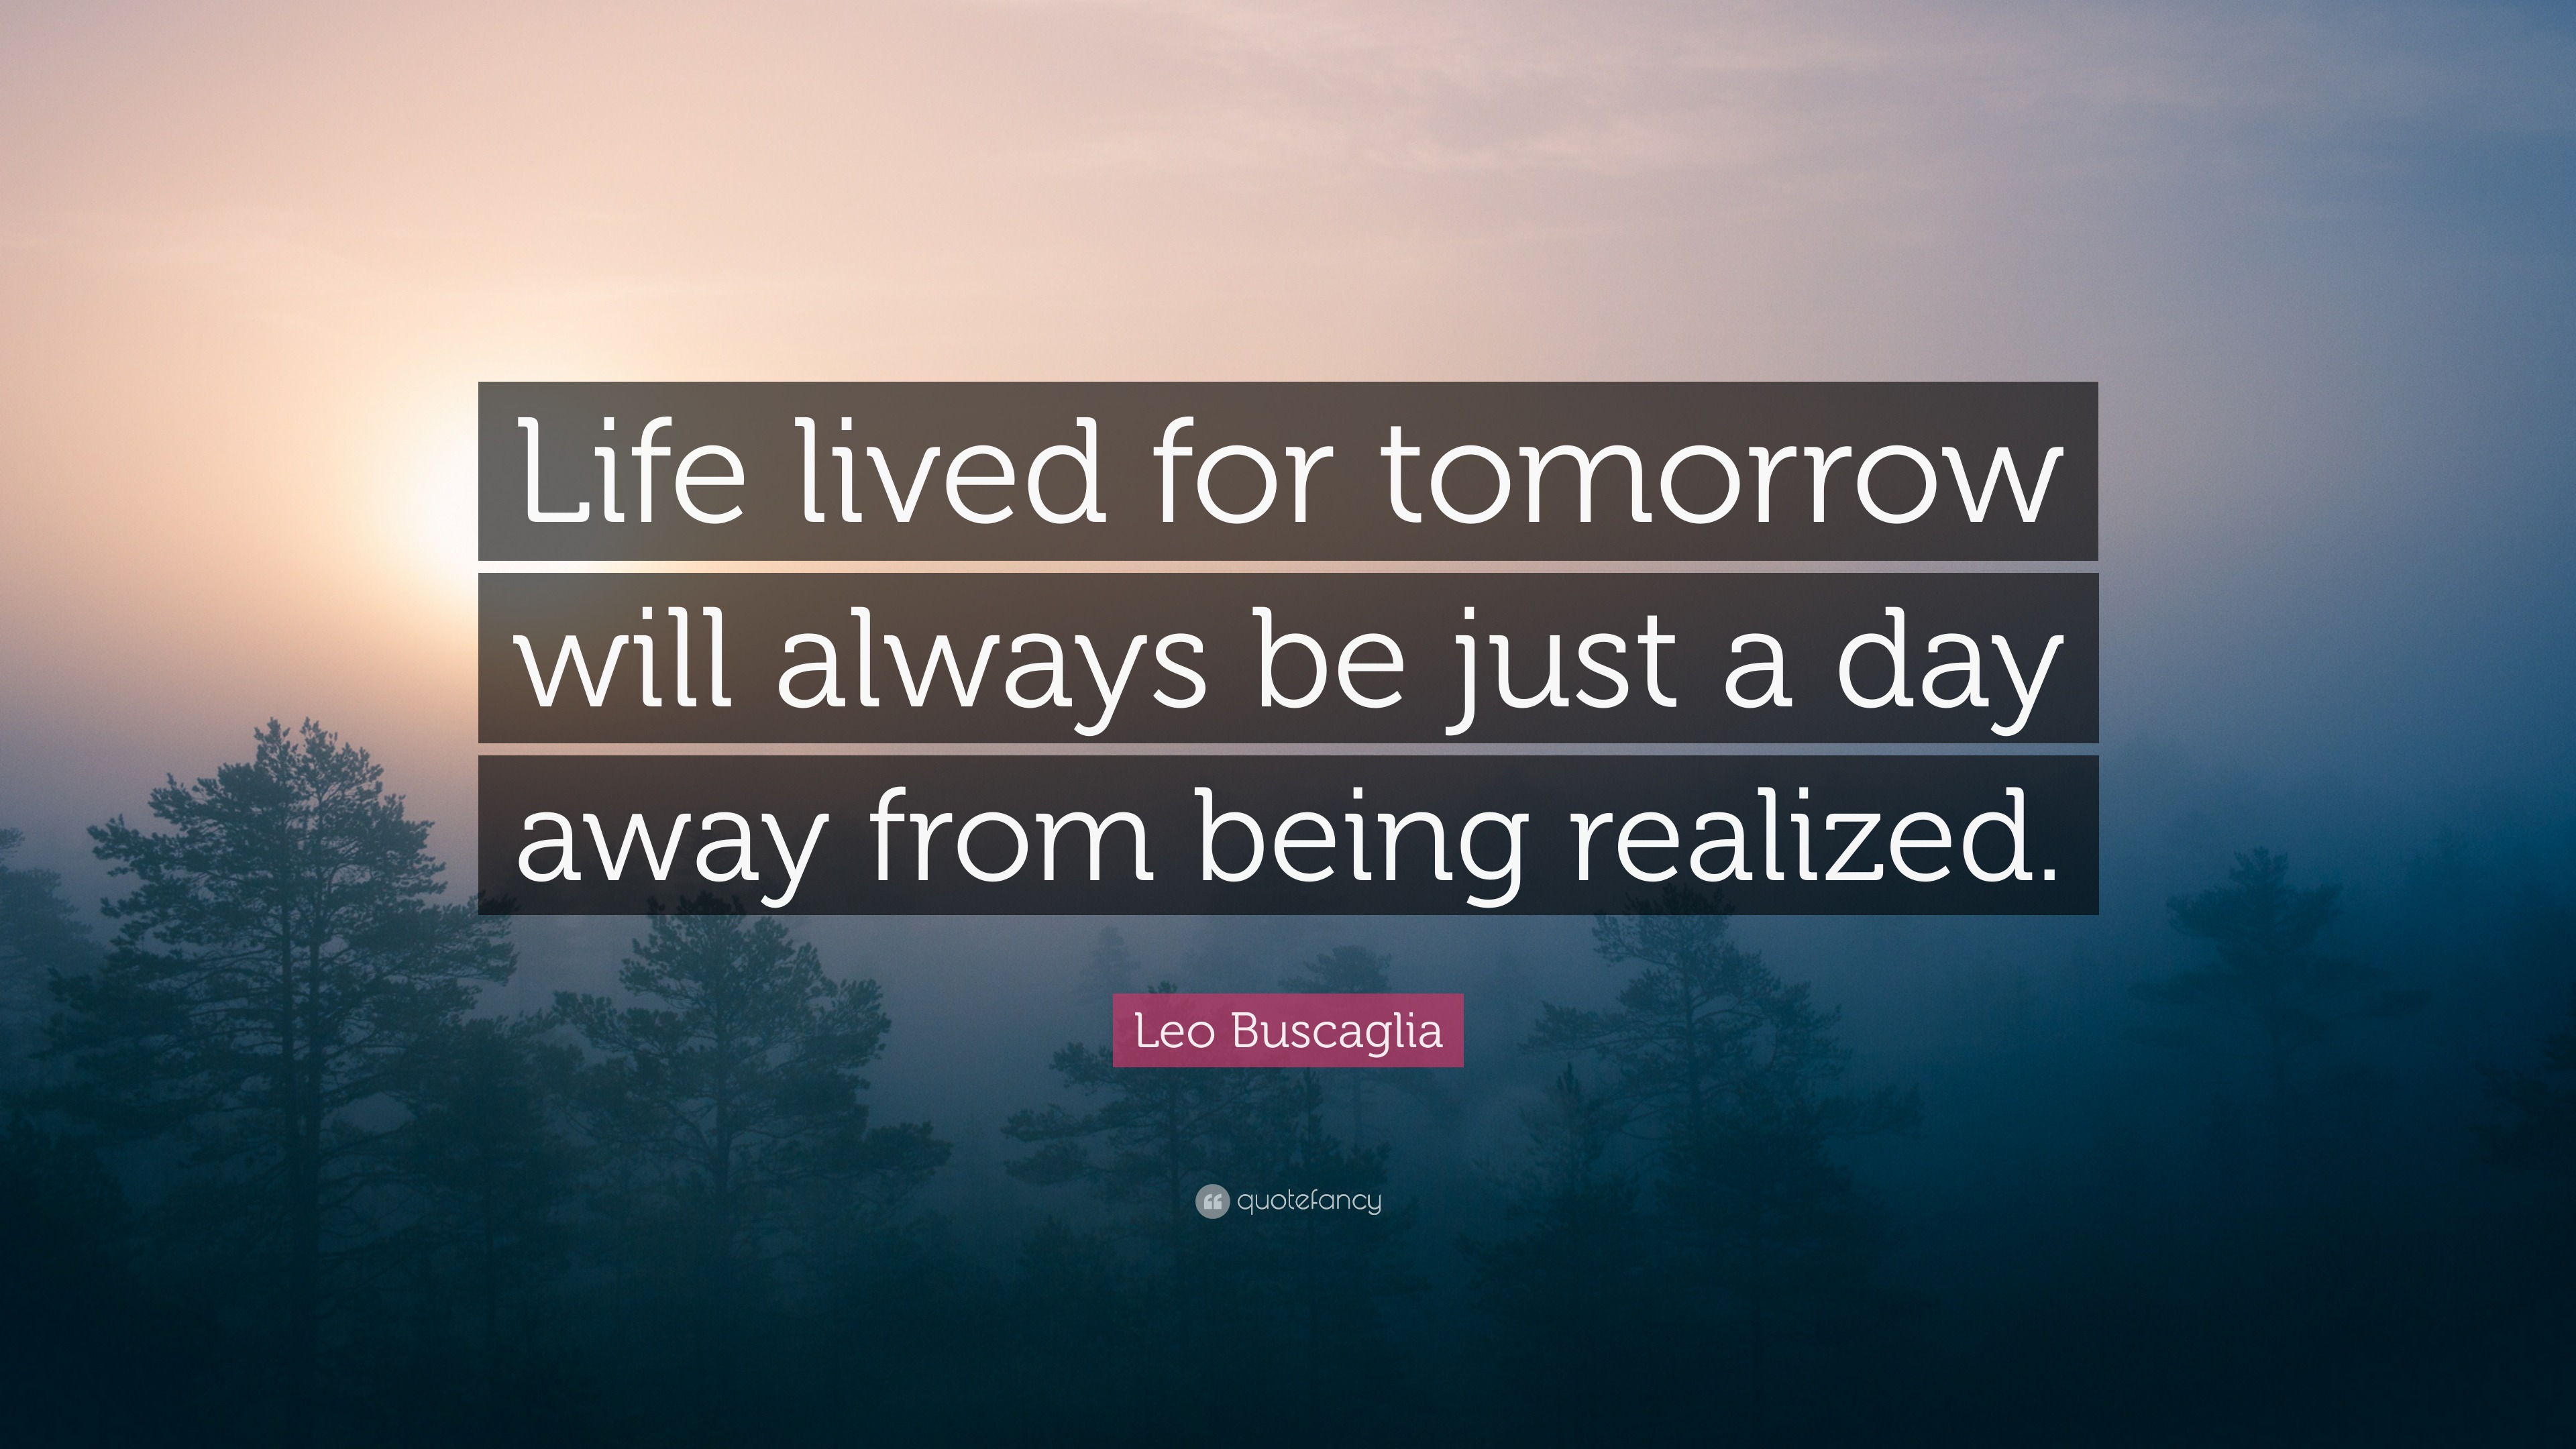 Leo Buscaglia Quote: “Life lived for tomorrow will always be just a day ...